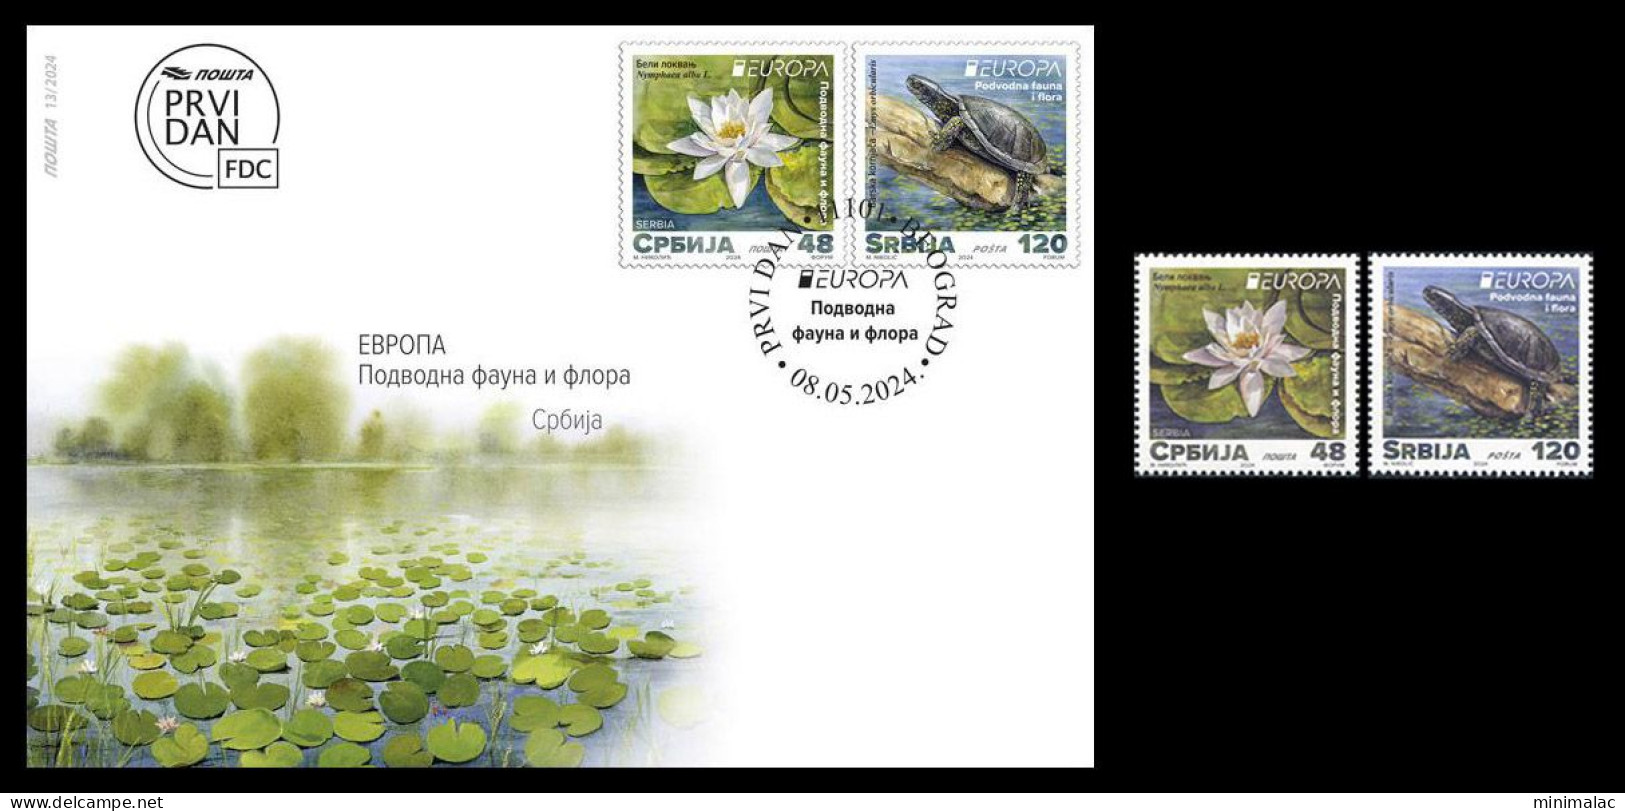 Serbia 2024. EUROPA, Underwater Fauna And Flora, Water Lily, Turtle, FDC + Stamp, MNH - Serbie